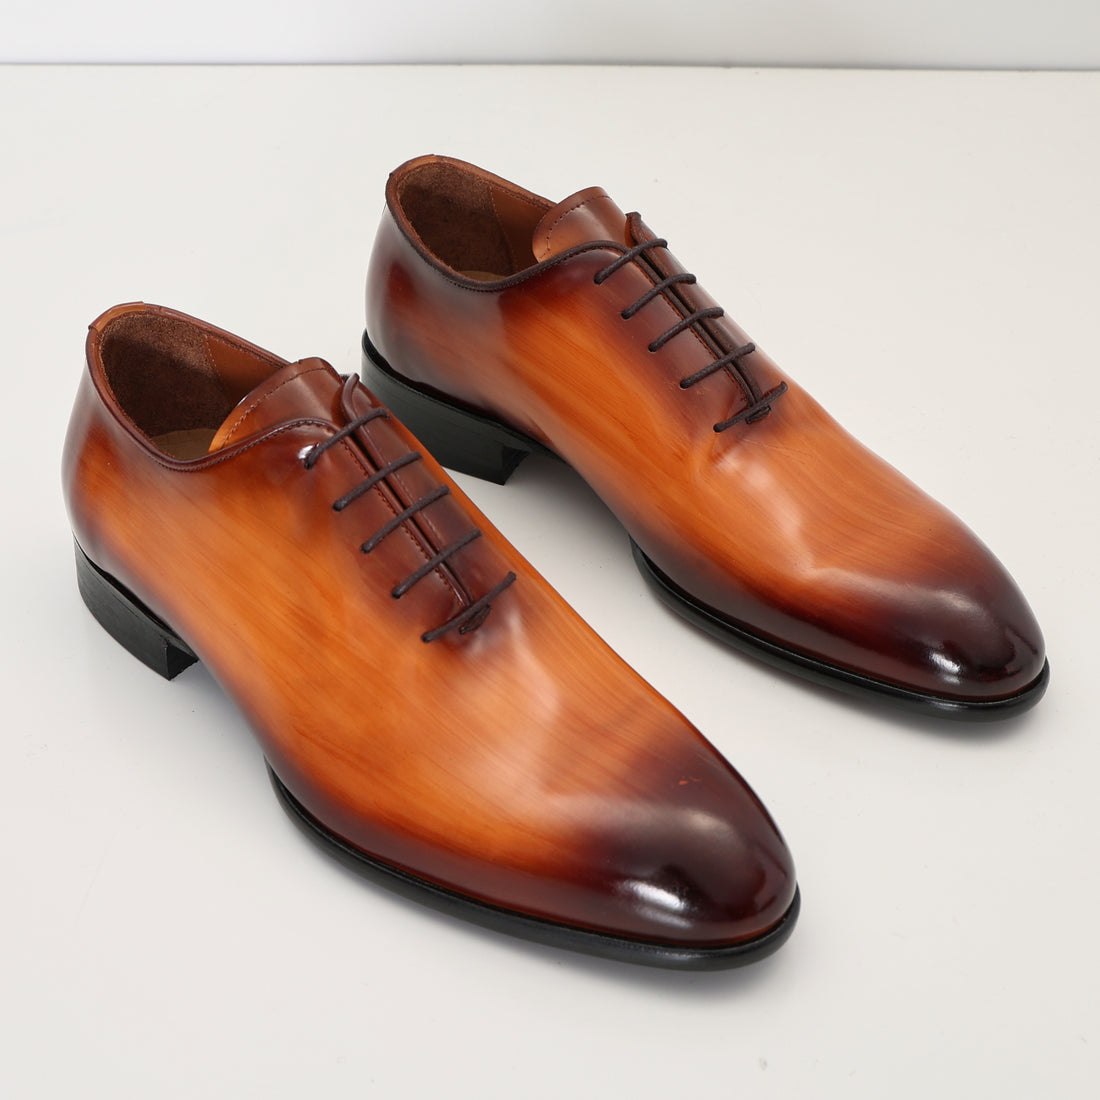 N° AC04 hand paint patina PATENT LEATHER OXFORDS - BROWN